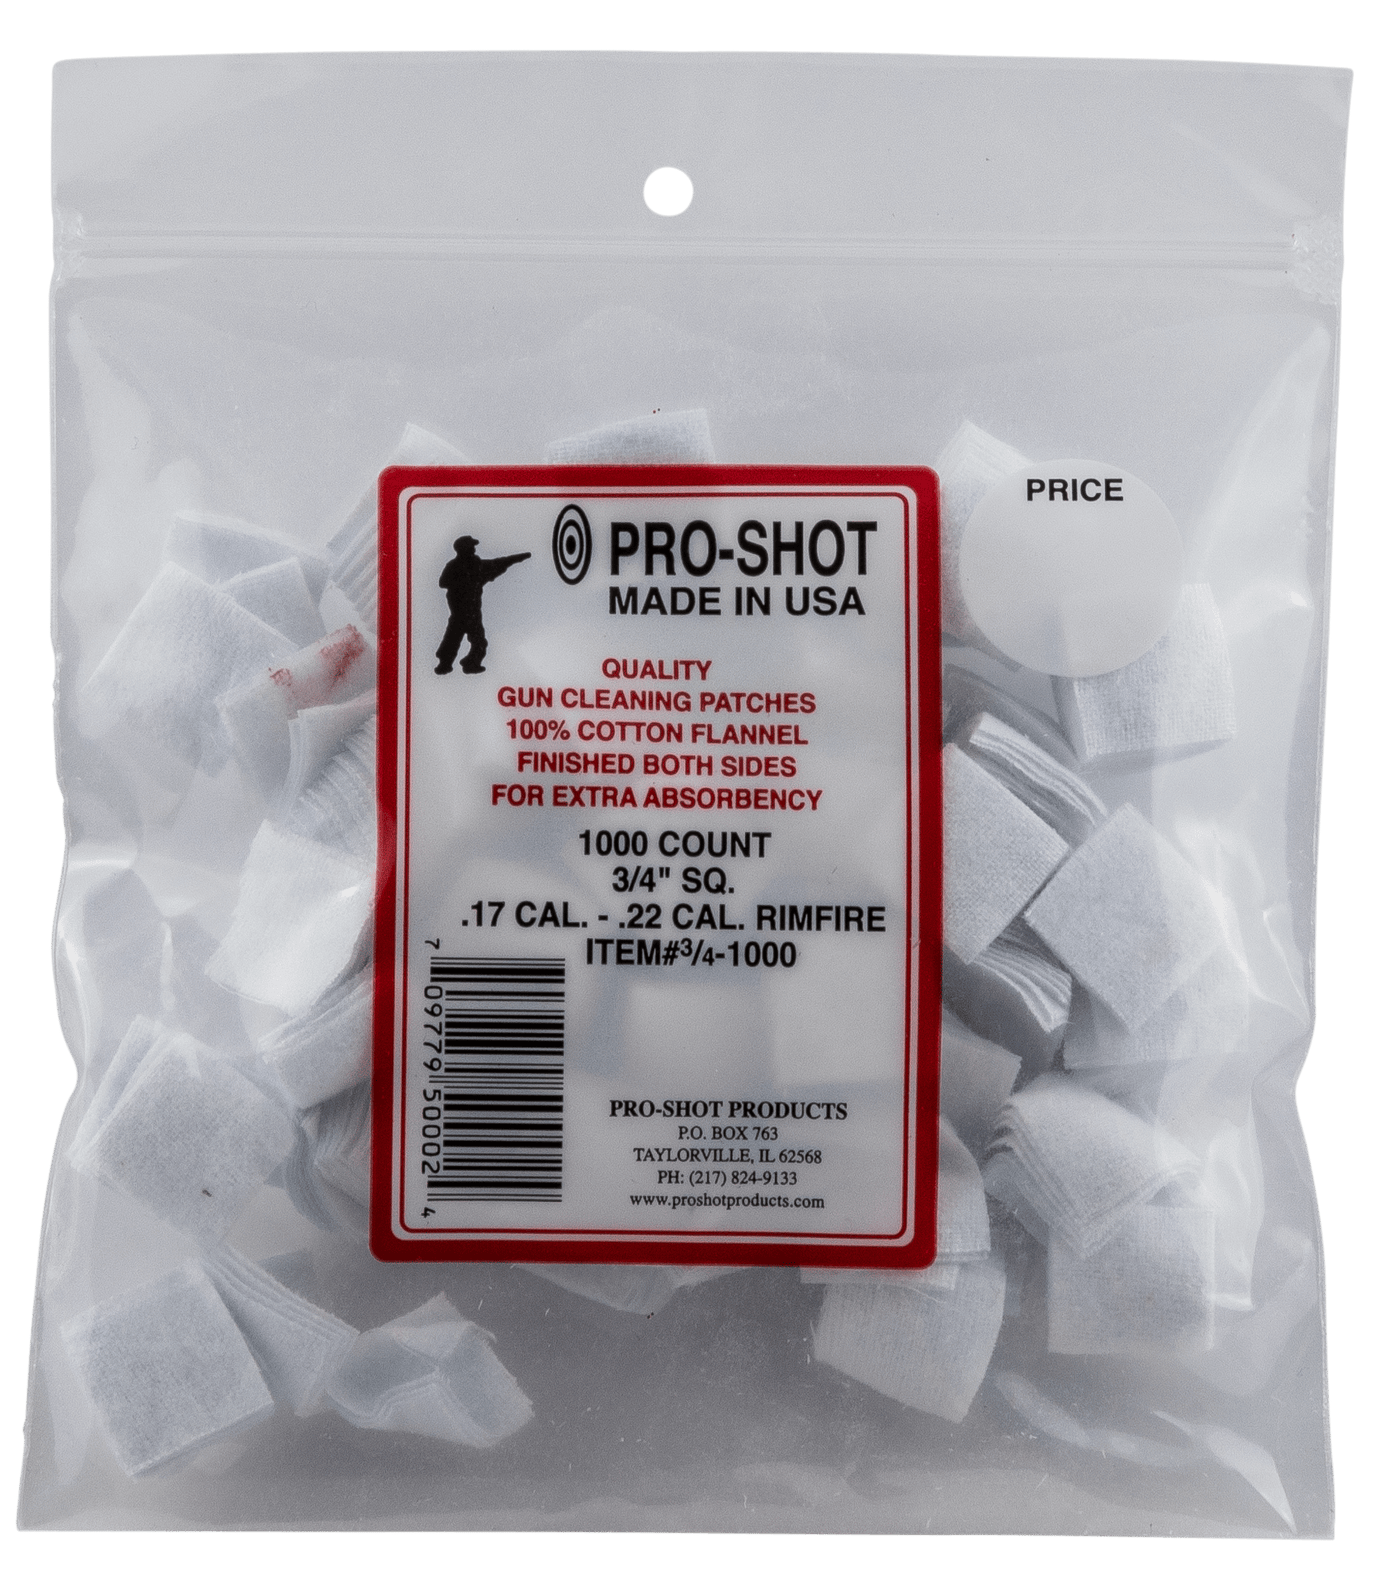 Pro-Shot Pro-shot Cleaning Patches, Proshot 3/4-1000       17-22c 3/4" Patch 1000 Gun Care